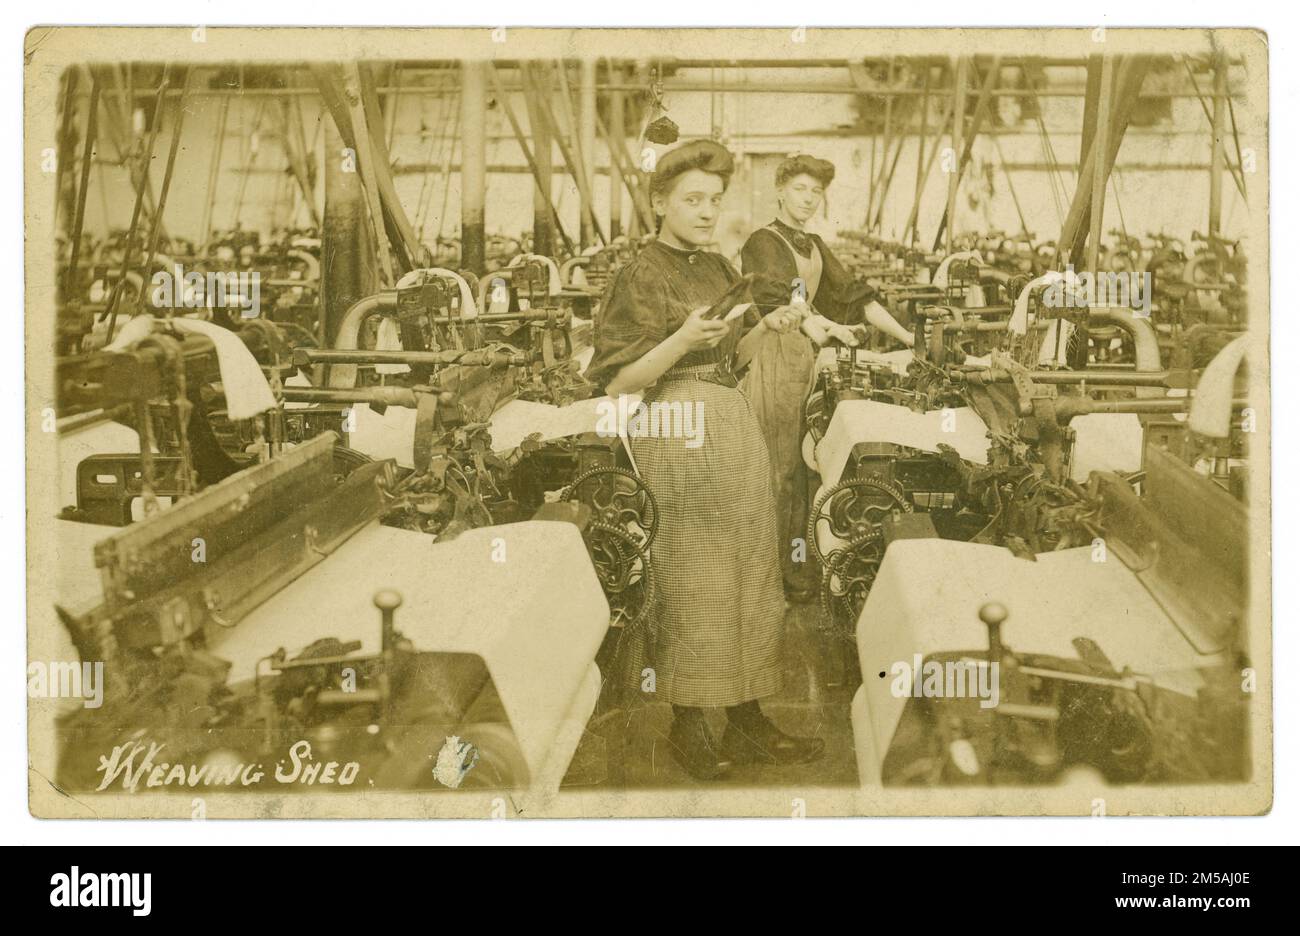 Original Edwardian era postcard of young female workers in a busy large weaving shed in front of their looms. The girl at the front appears to be of teenage years and is wearing clogs and holding a weaver's shuttle. Published by The Schofield Photographic Series circa 1906, Bollington, Cheshire, England, U.K. traditionally silk-weaving towns. Bollington is a traditionally silk weaving town in Cheshire Stock Photo